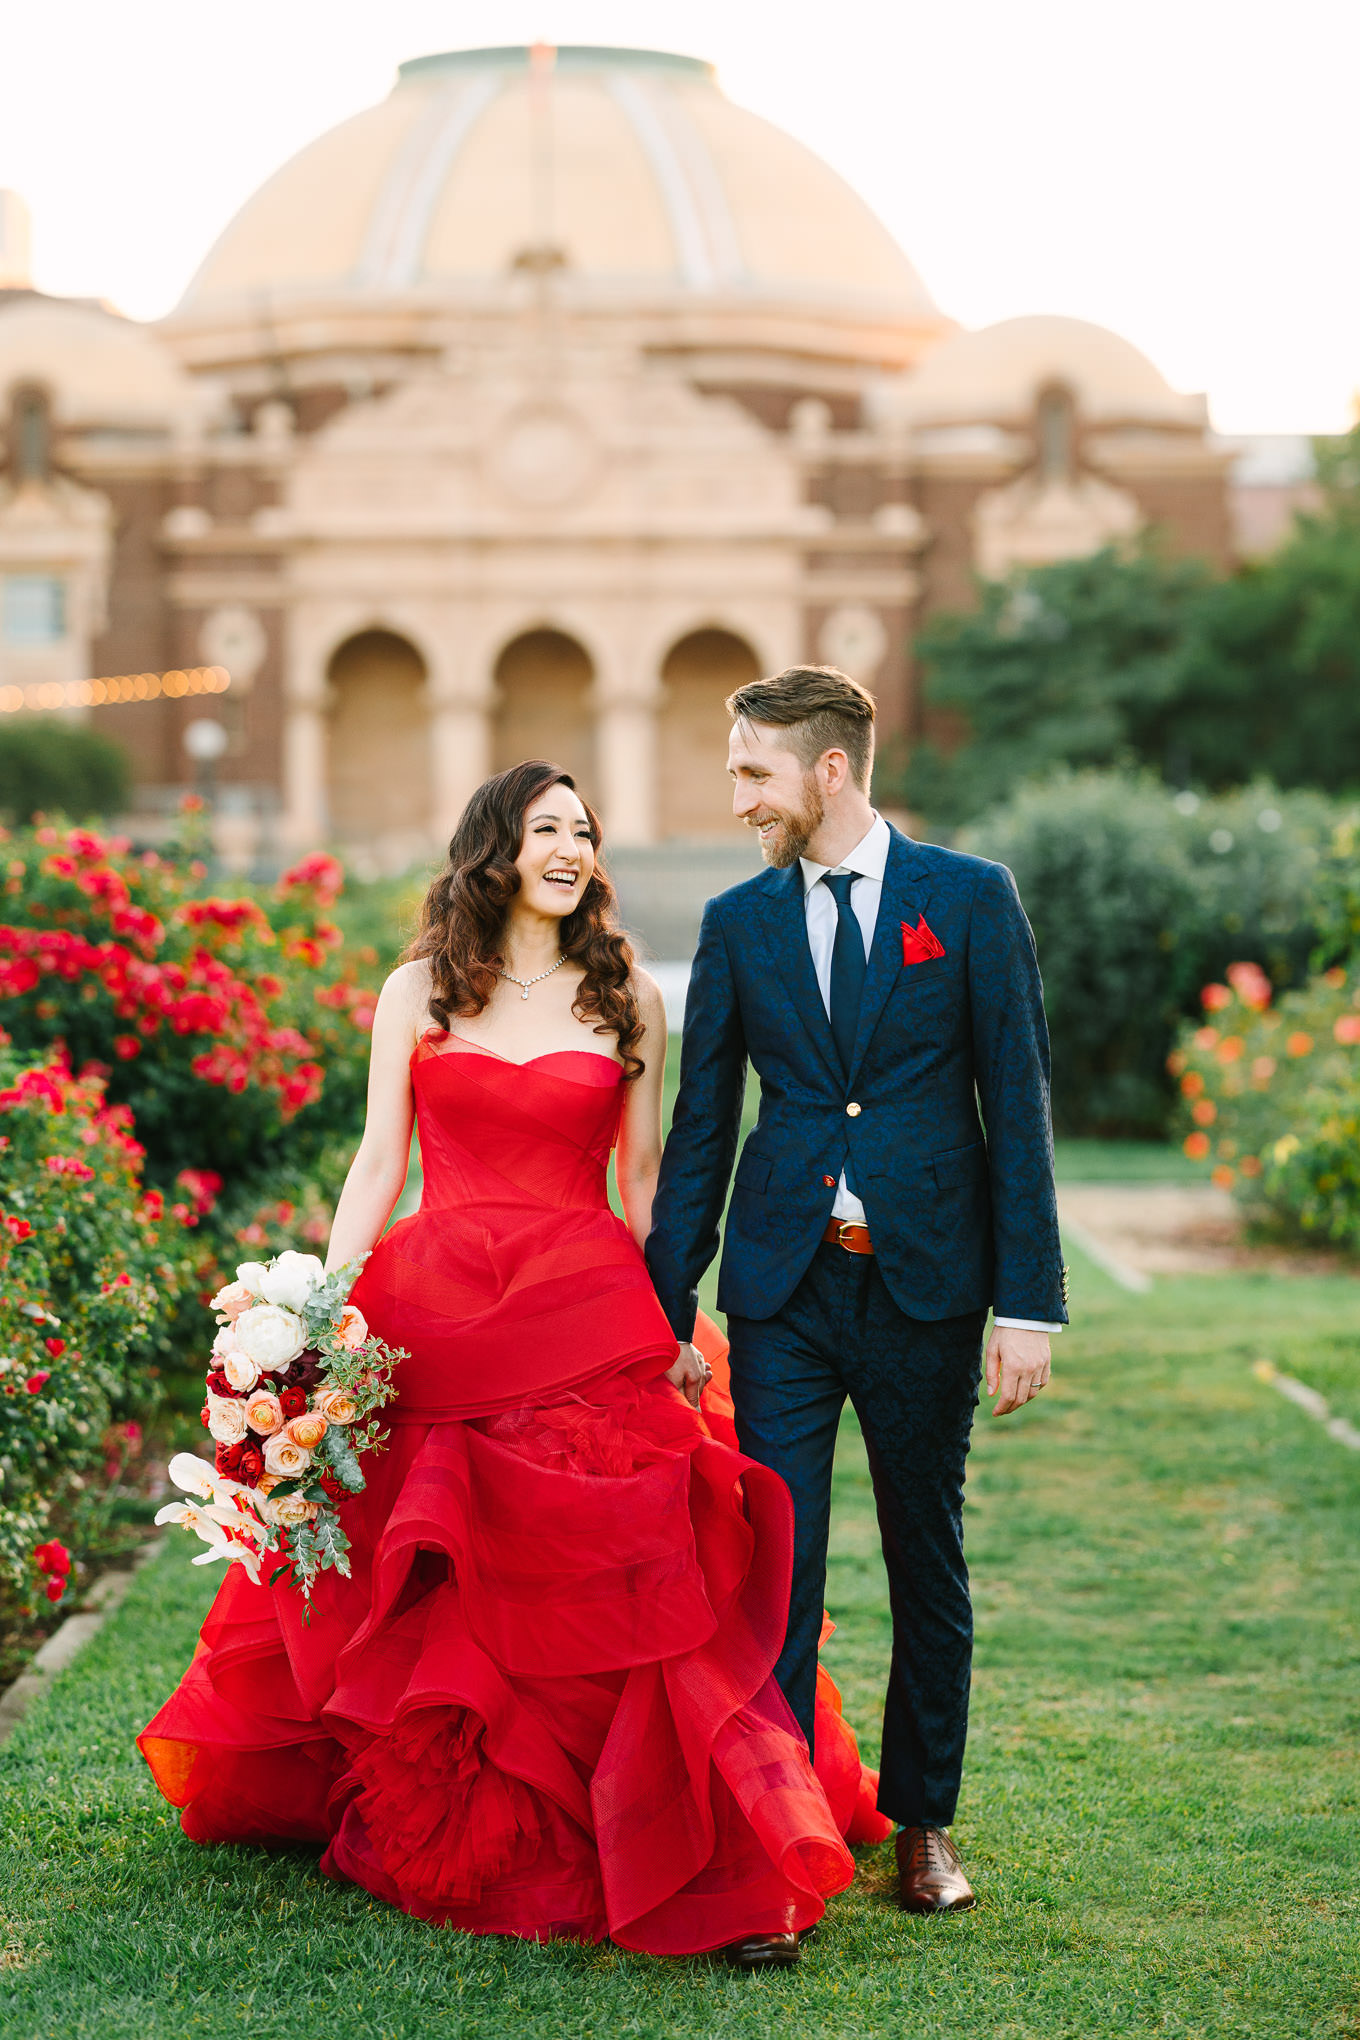 Natural History Museum Wedding with bride in red gown | Wedding and elopement photography roundup | Los Angeles and Palm Springs  photographer | #losangeleswedding #palmspringswedding #elopementphotographer

Source: Mary Costa Photography | Los Angeles 